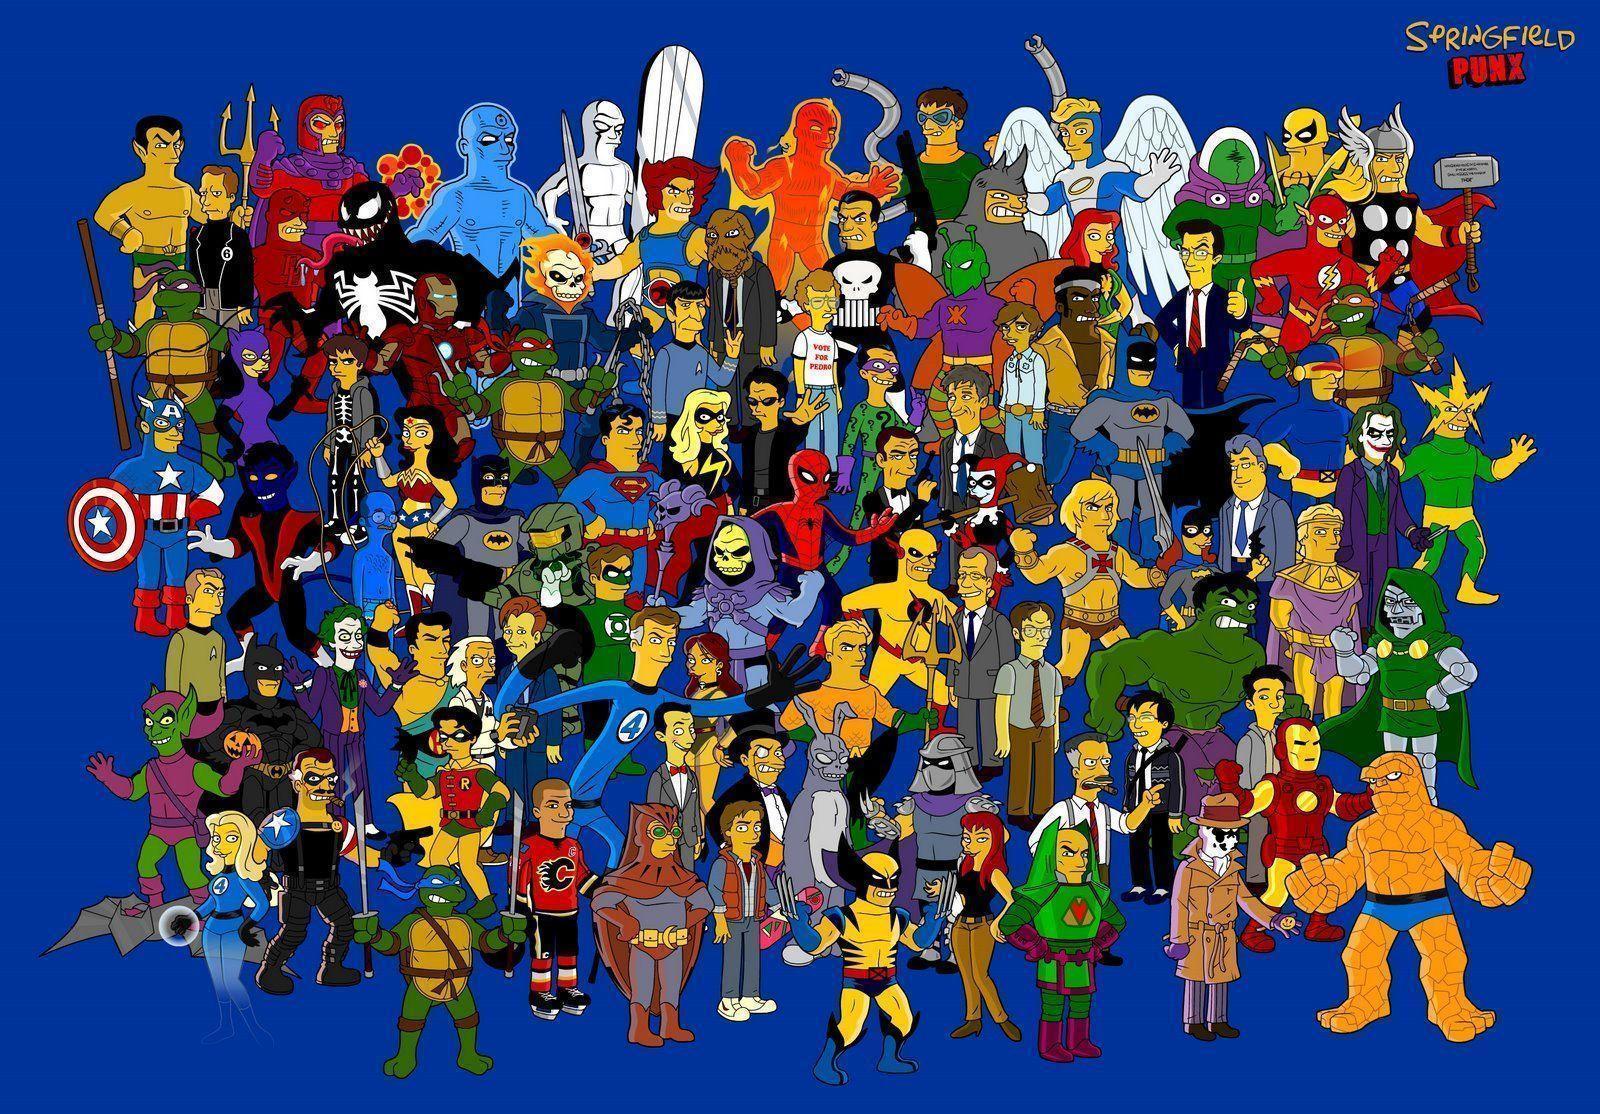 Every Simpsons Character Wallpaper HD wallpaper